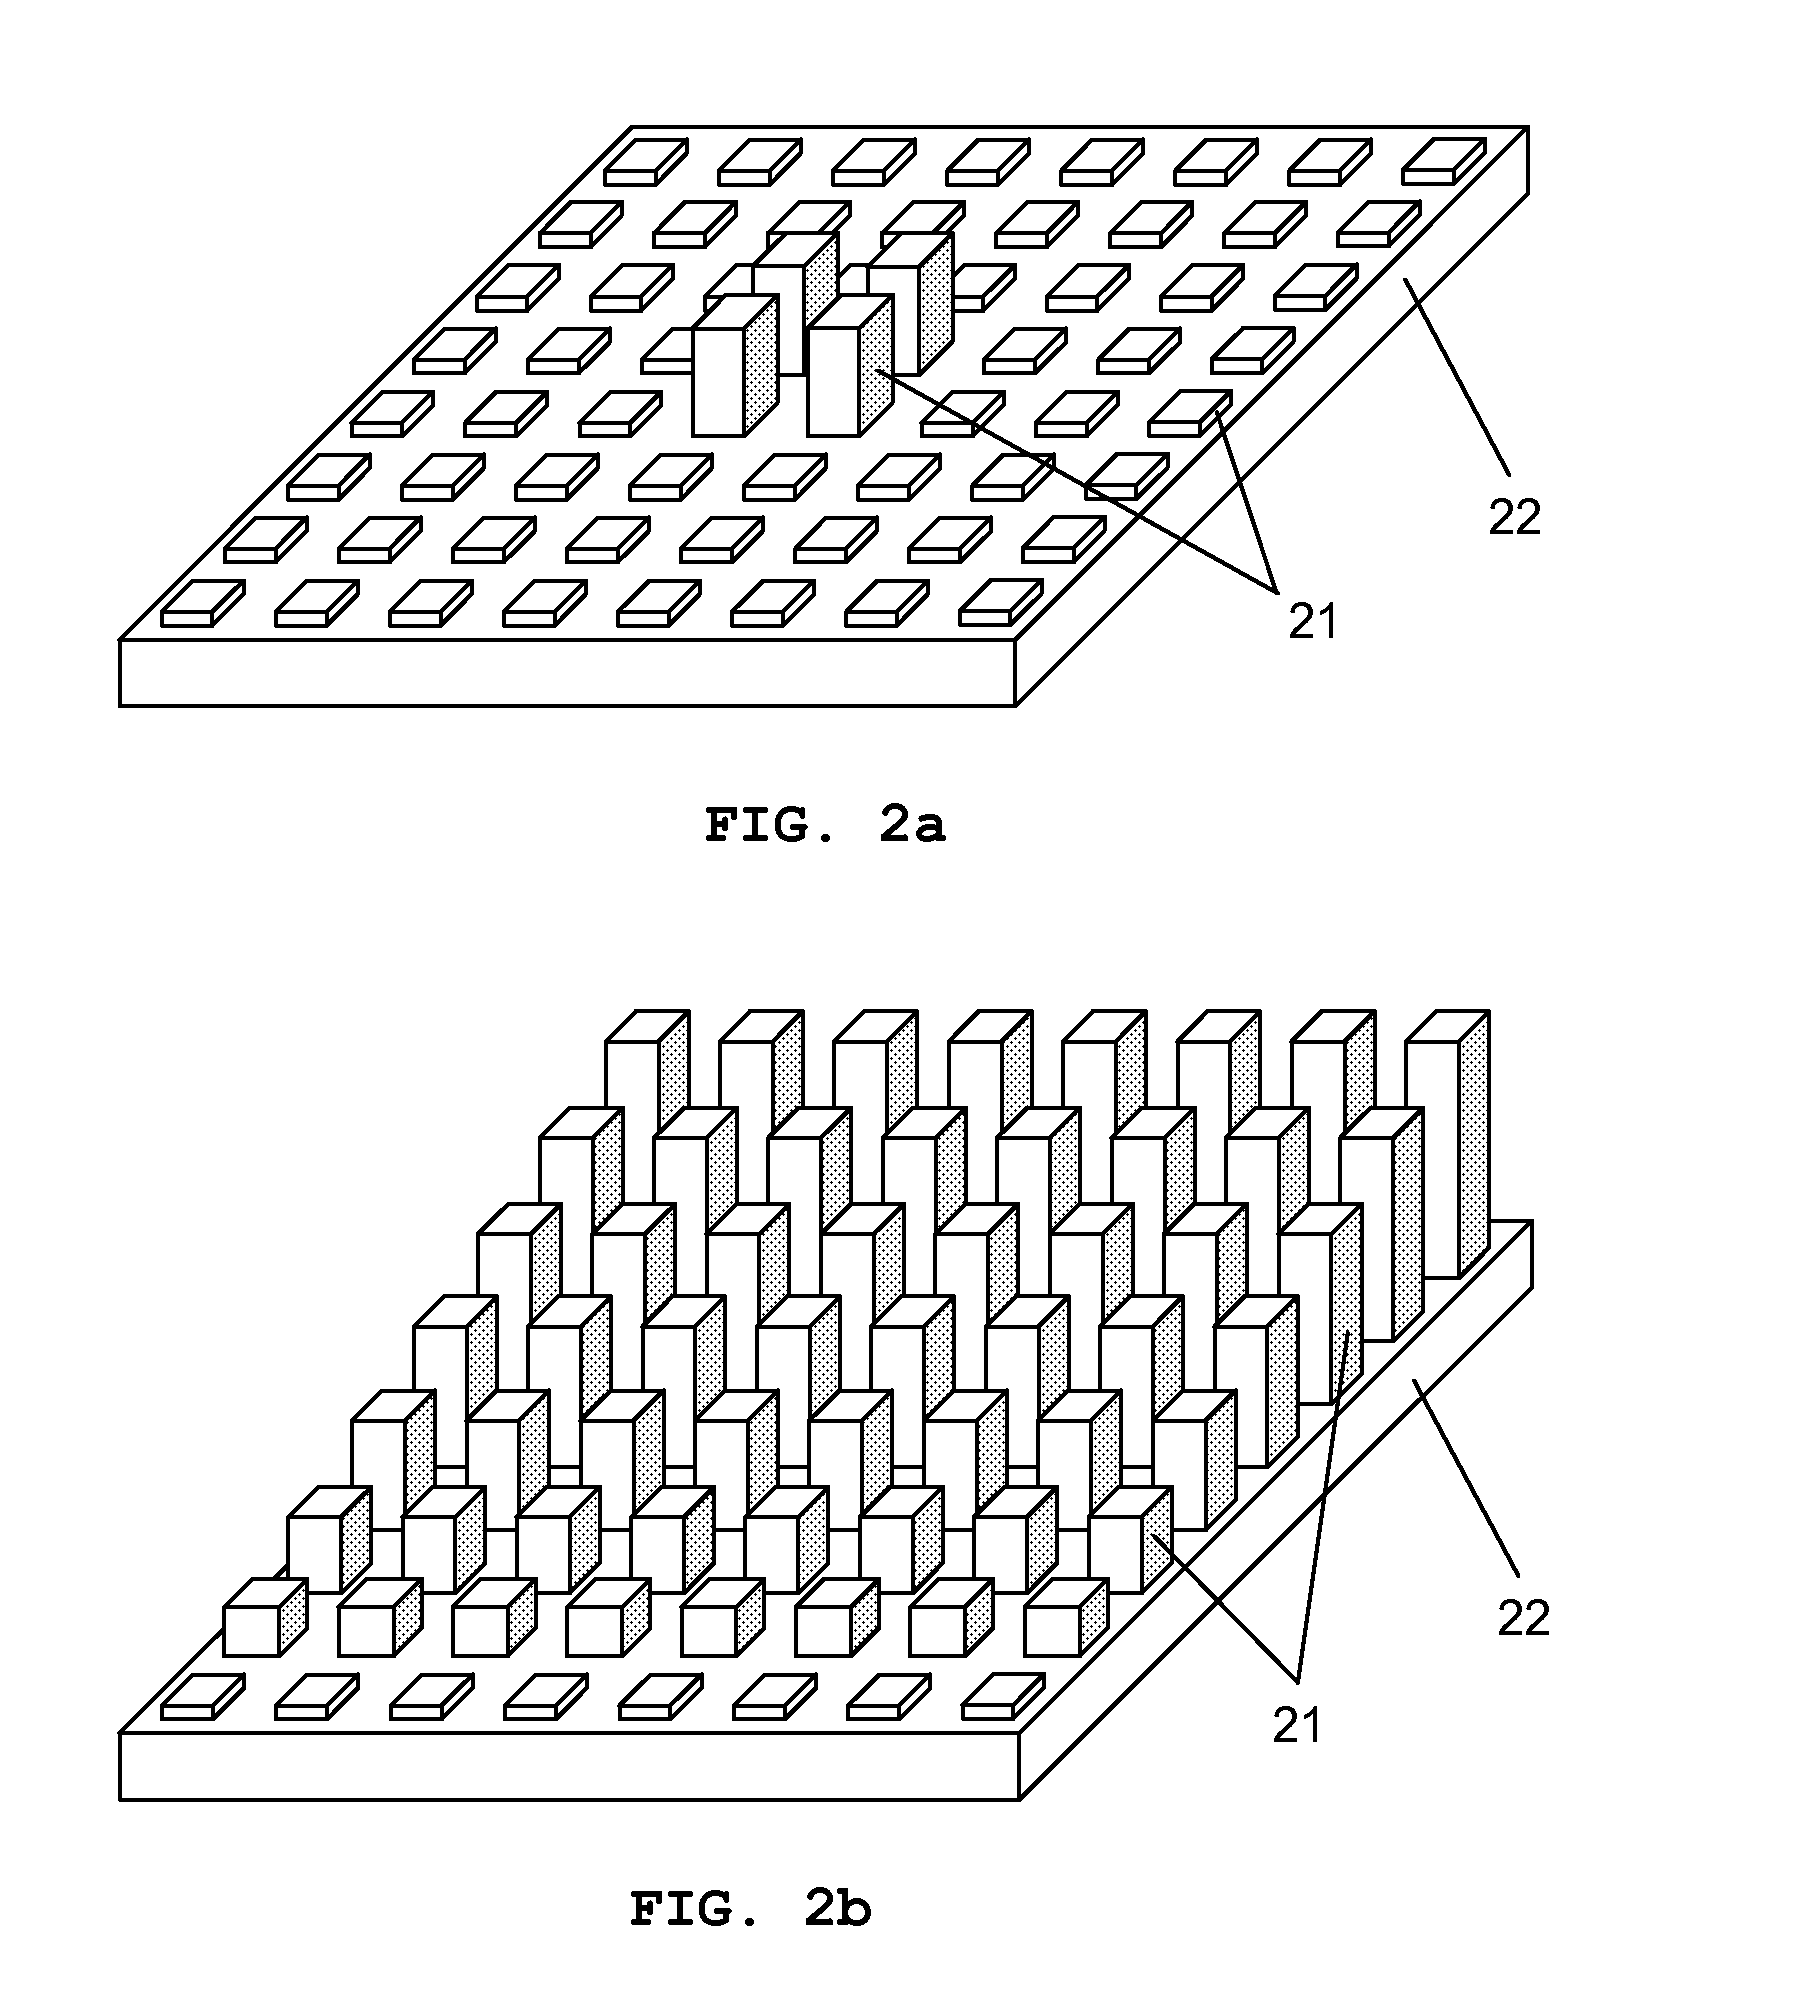 Discretely controlled micromirror array device with segmented electrodes